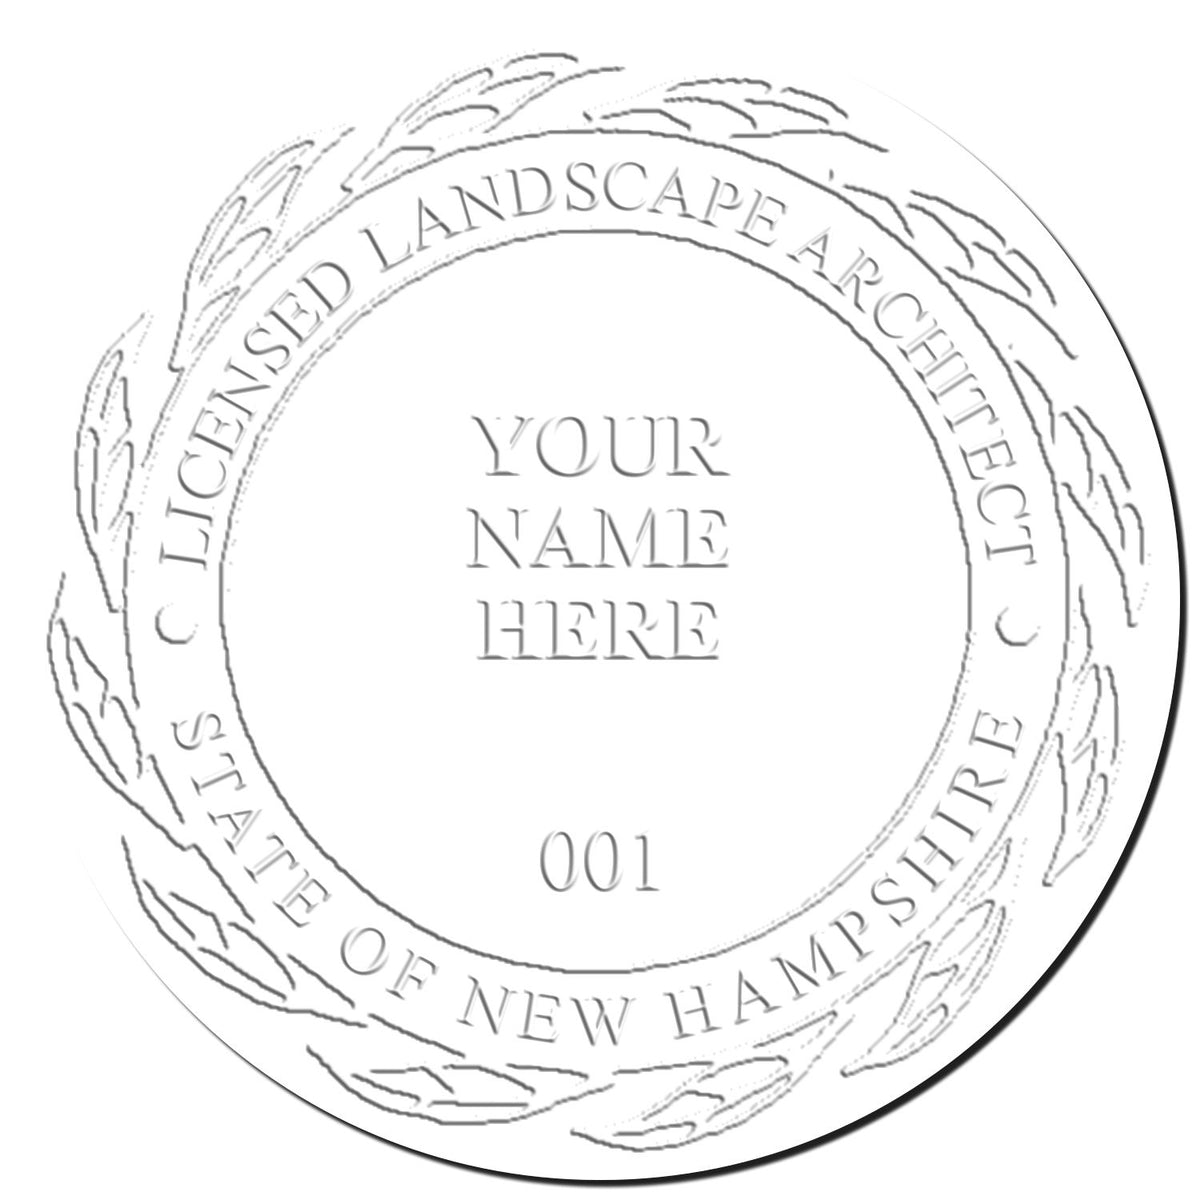 This paper is stamped with a sample imprint of the Hybrid New Hampshire Landscape Architect Seal, signifying its quality and reliability.